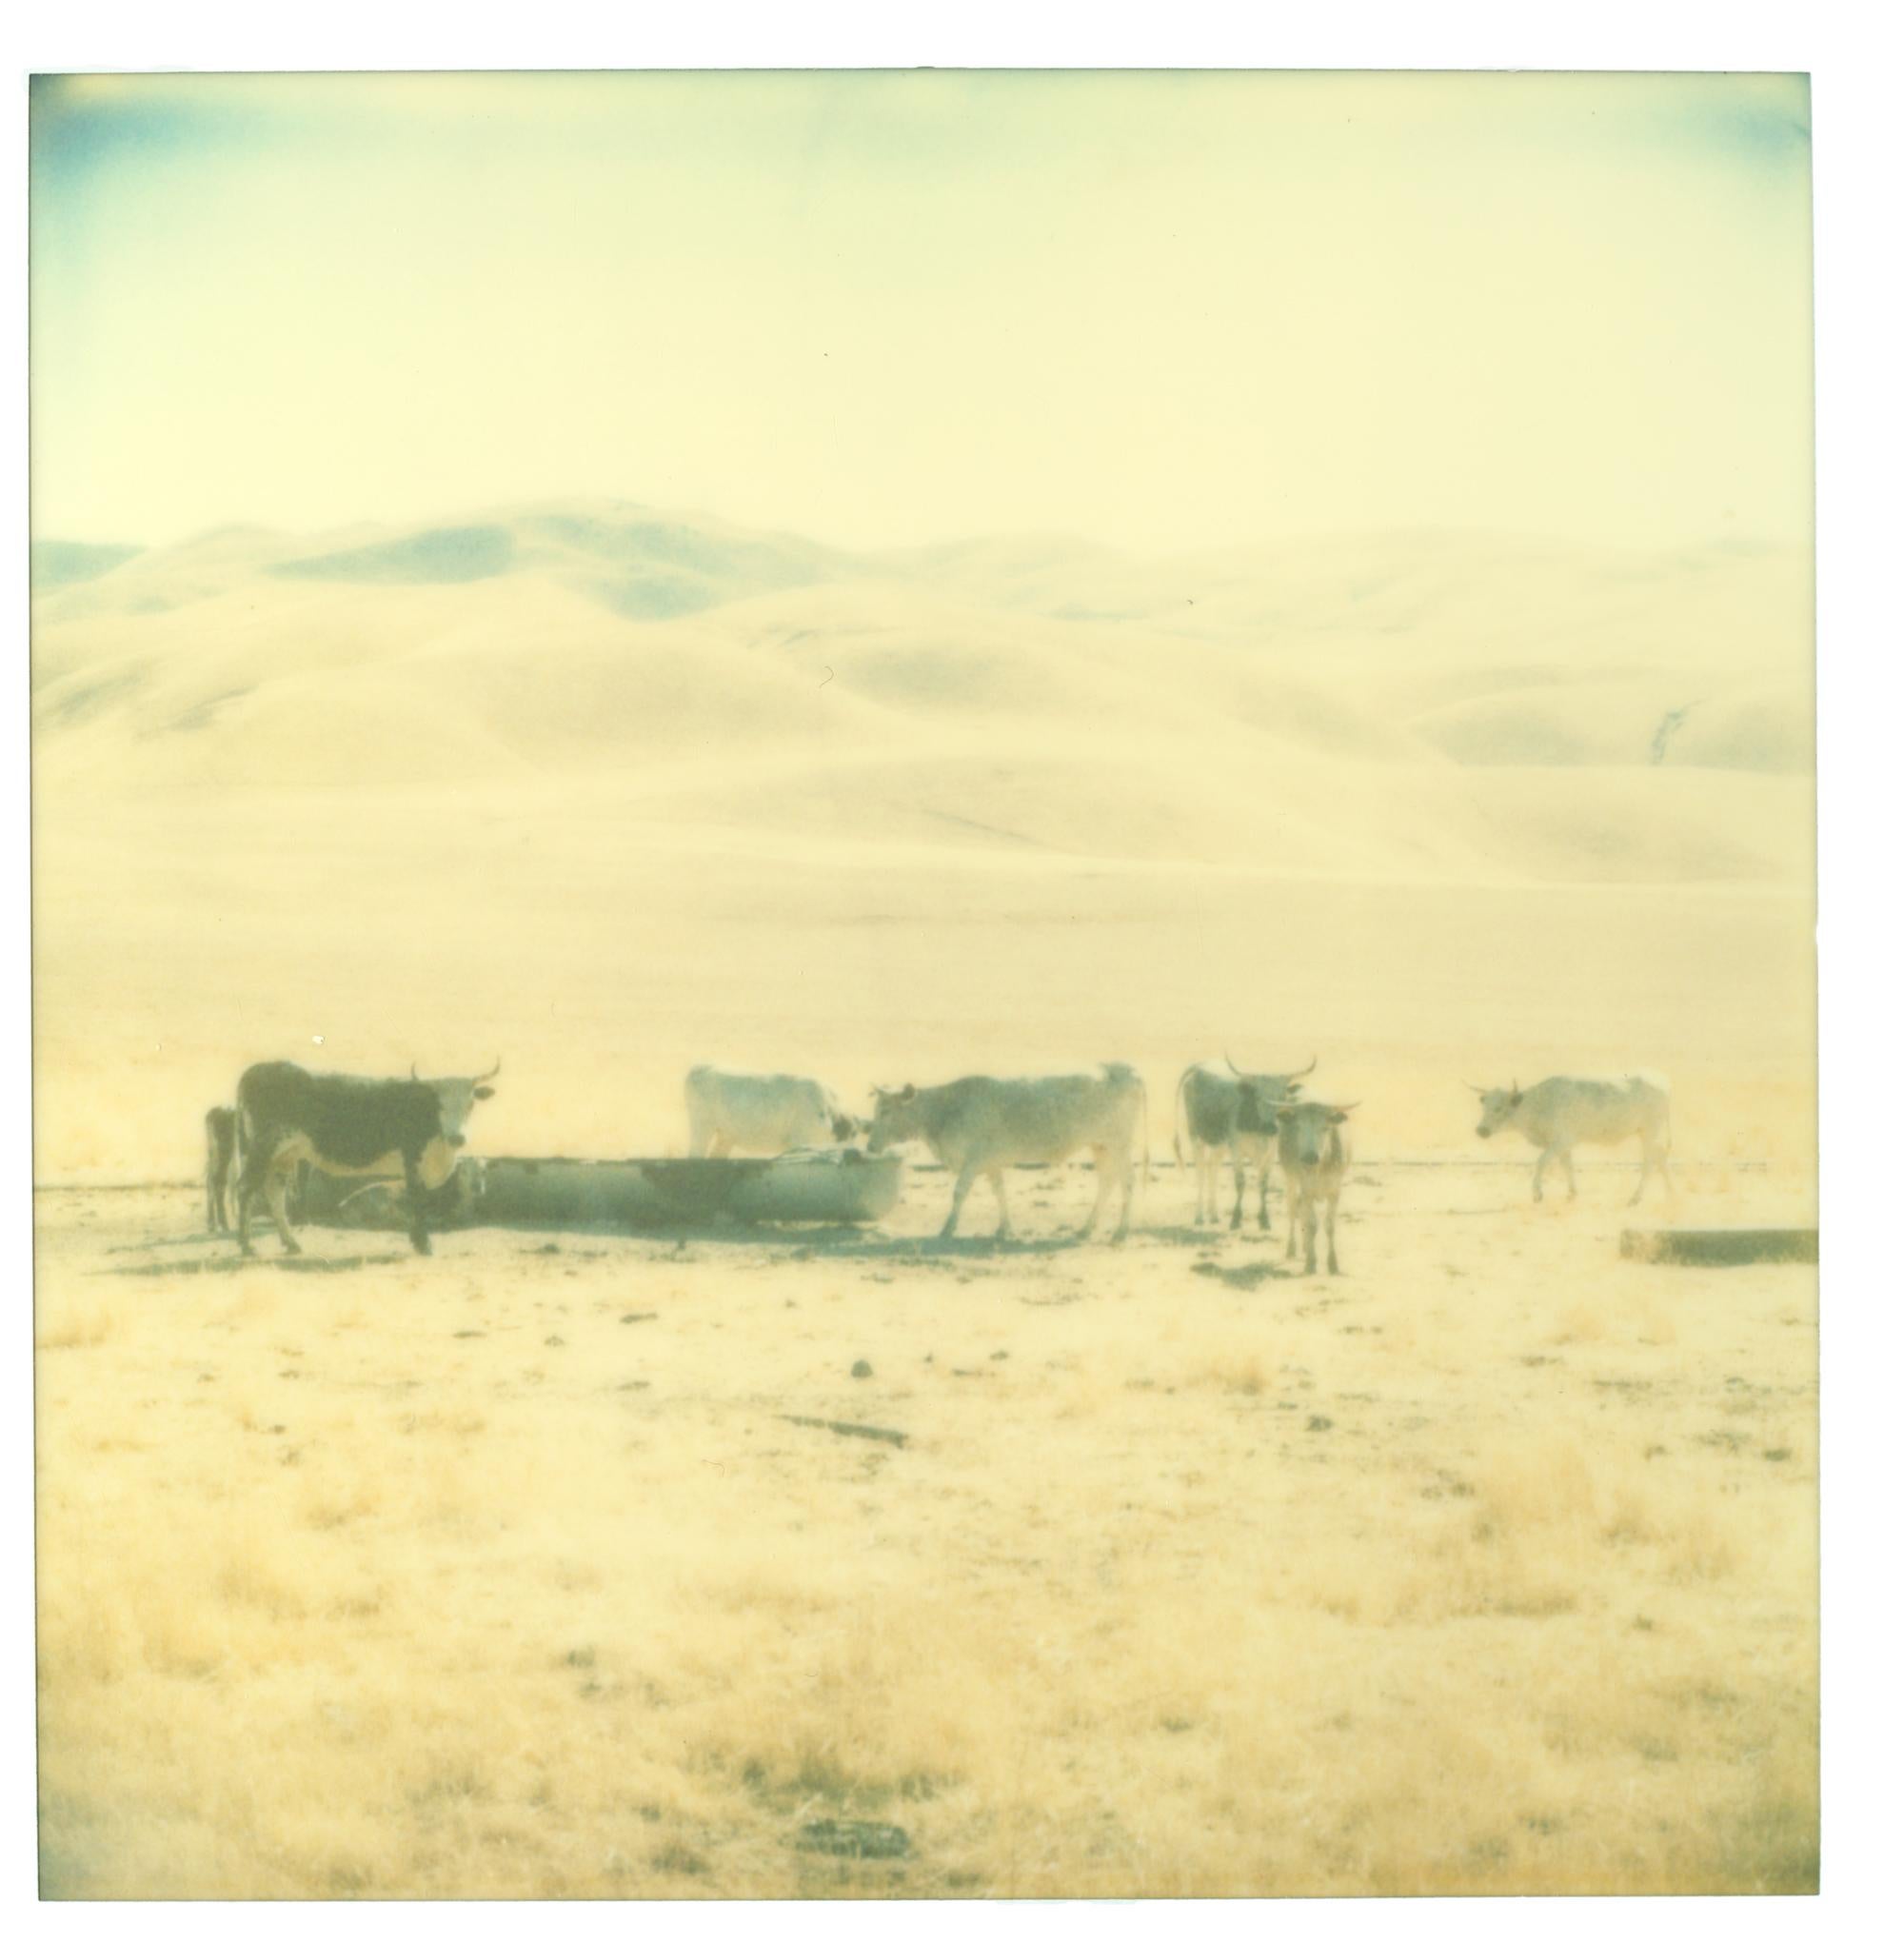 Untitled (Oilfields), triptych, 2004, 

60x60cm each, installed 60x200cm, Edition 6/10. 
3 Analog C-Prints, hand-printed by the artist based on 3 original Polaroids.
Certificate and Signature label. 
Artist Inventory No 1198.06. 
Not mounted.